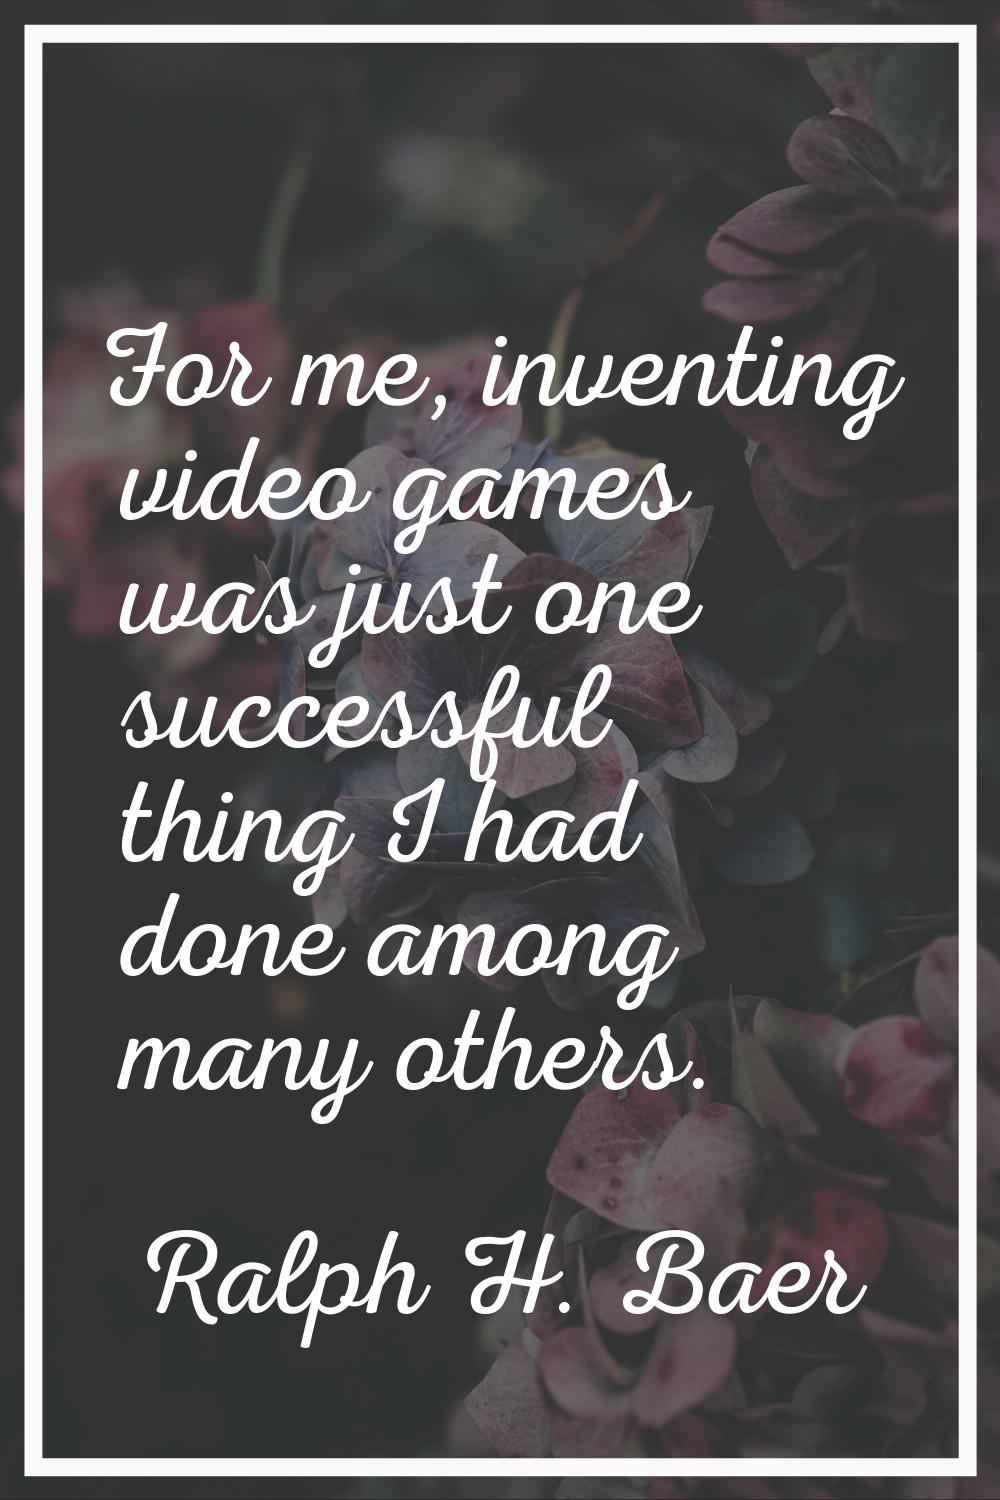 For me, inventing video games was just one successful thing I had done among many others.